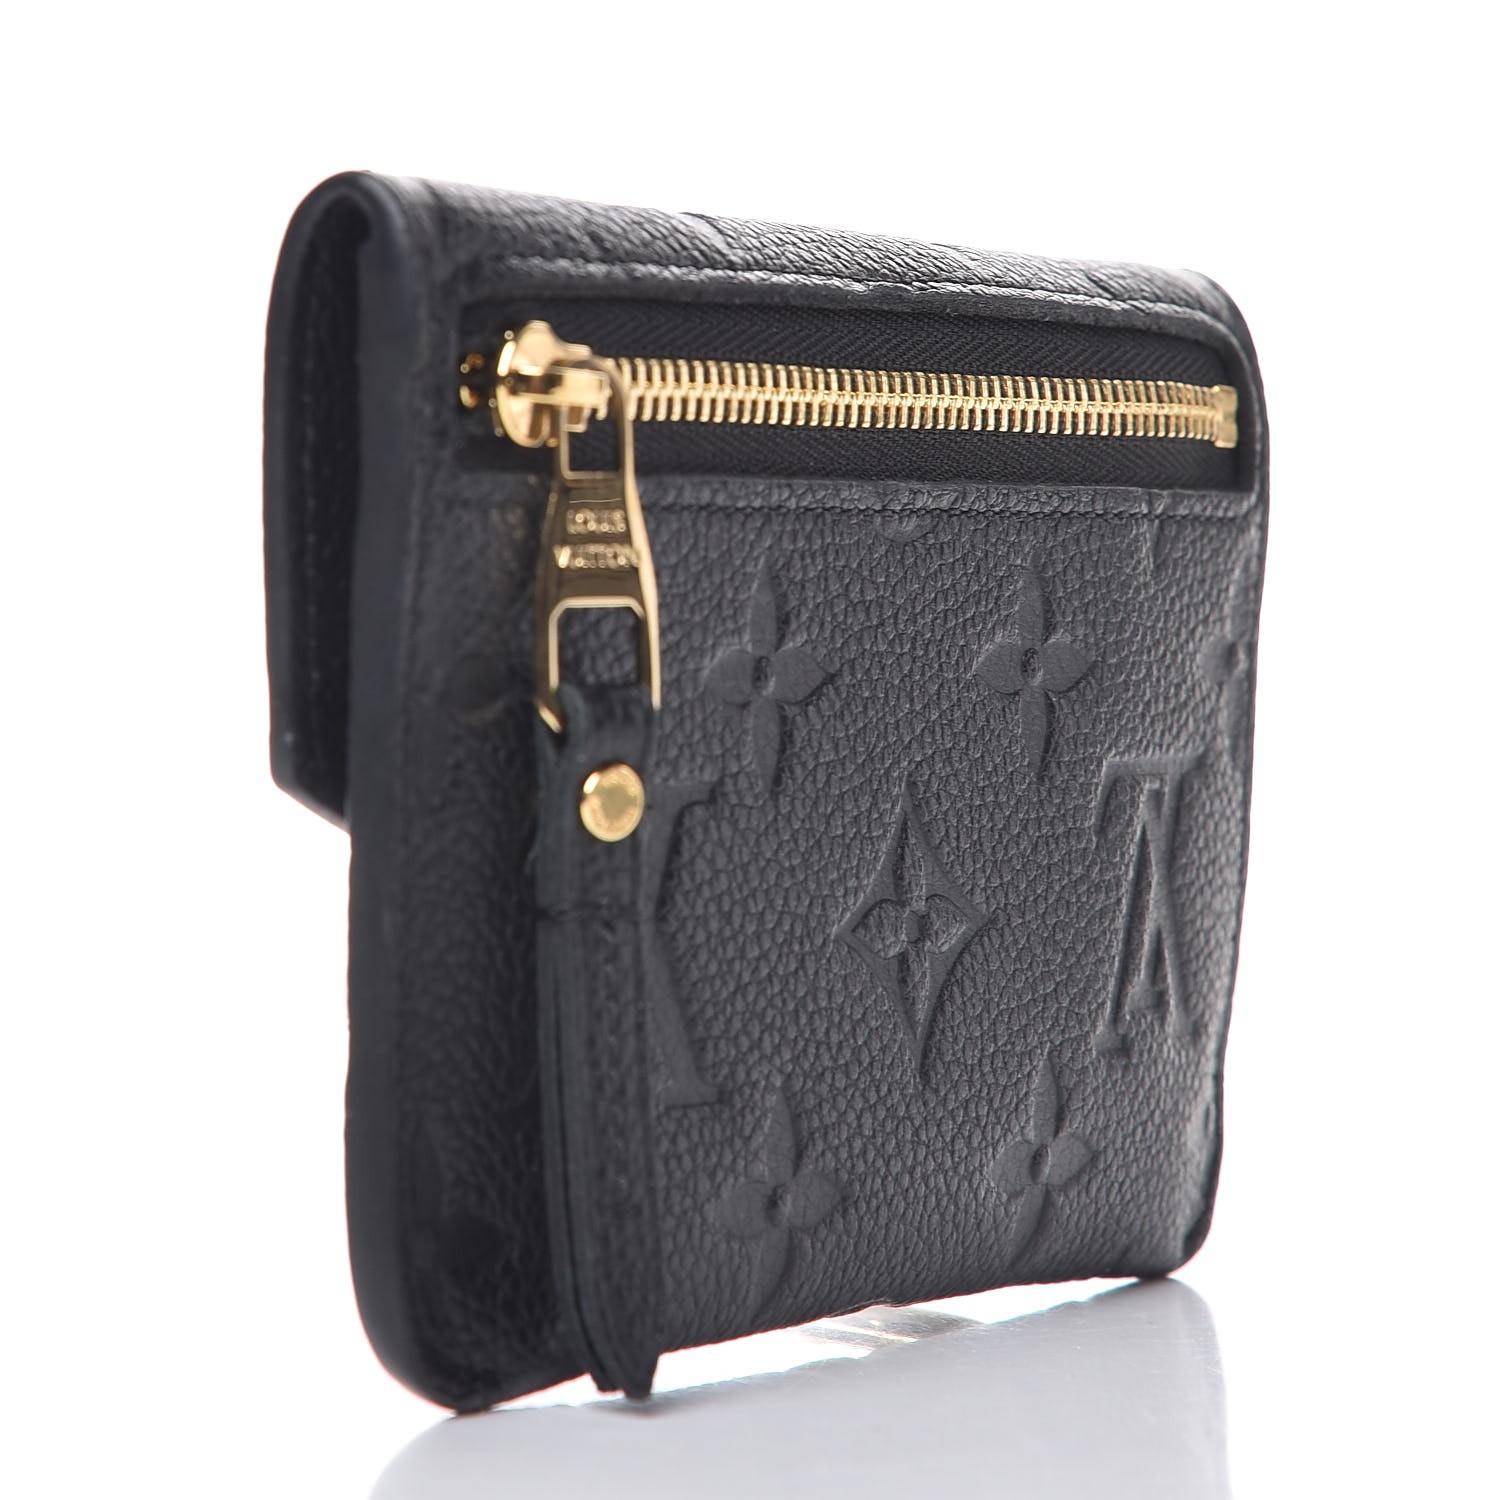 Key Pouch Monogram Empreinte Leather - Wallets and Small Leather